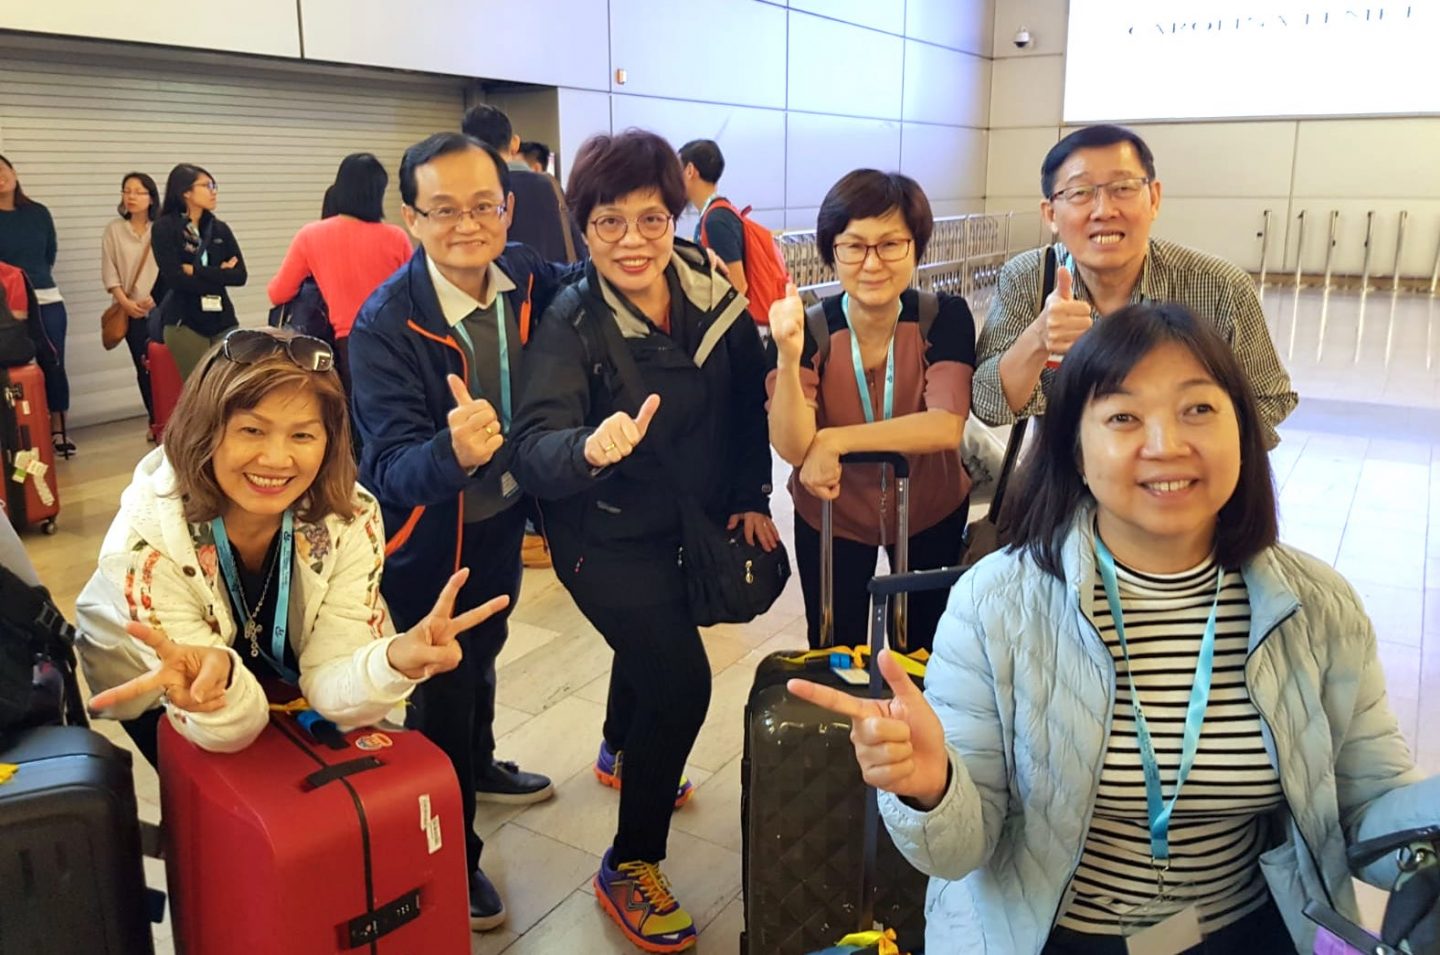 Esther (far left) with the group she was assigned to for the Israel tour. Alice Tok (third from left) was the one who said the sinners prayer with Esther when she decided to receive Christ.